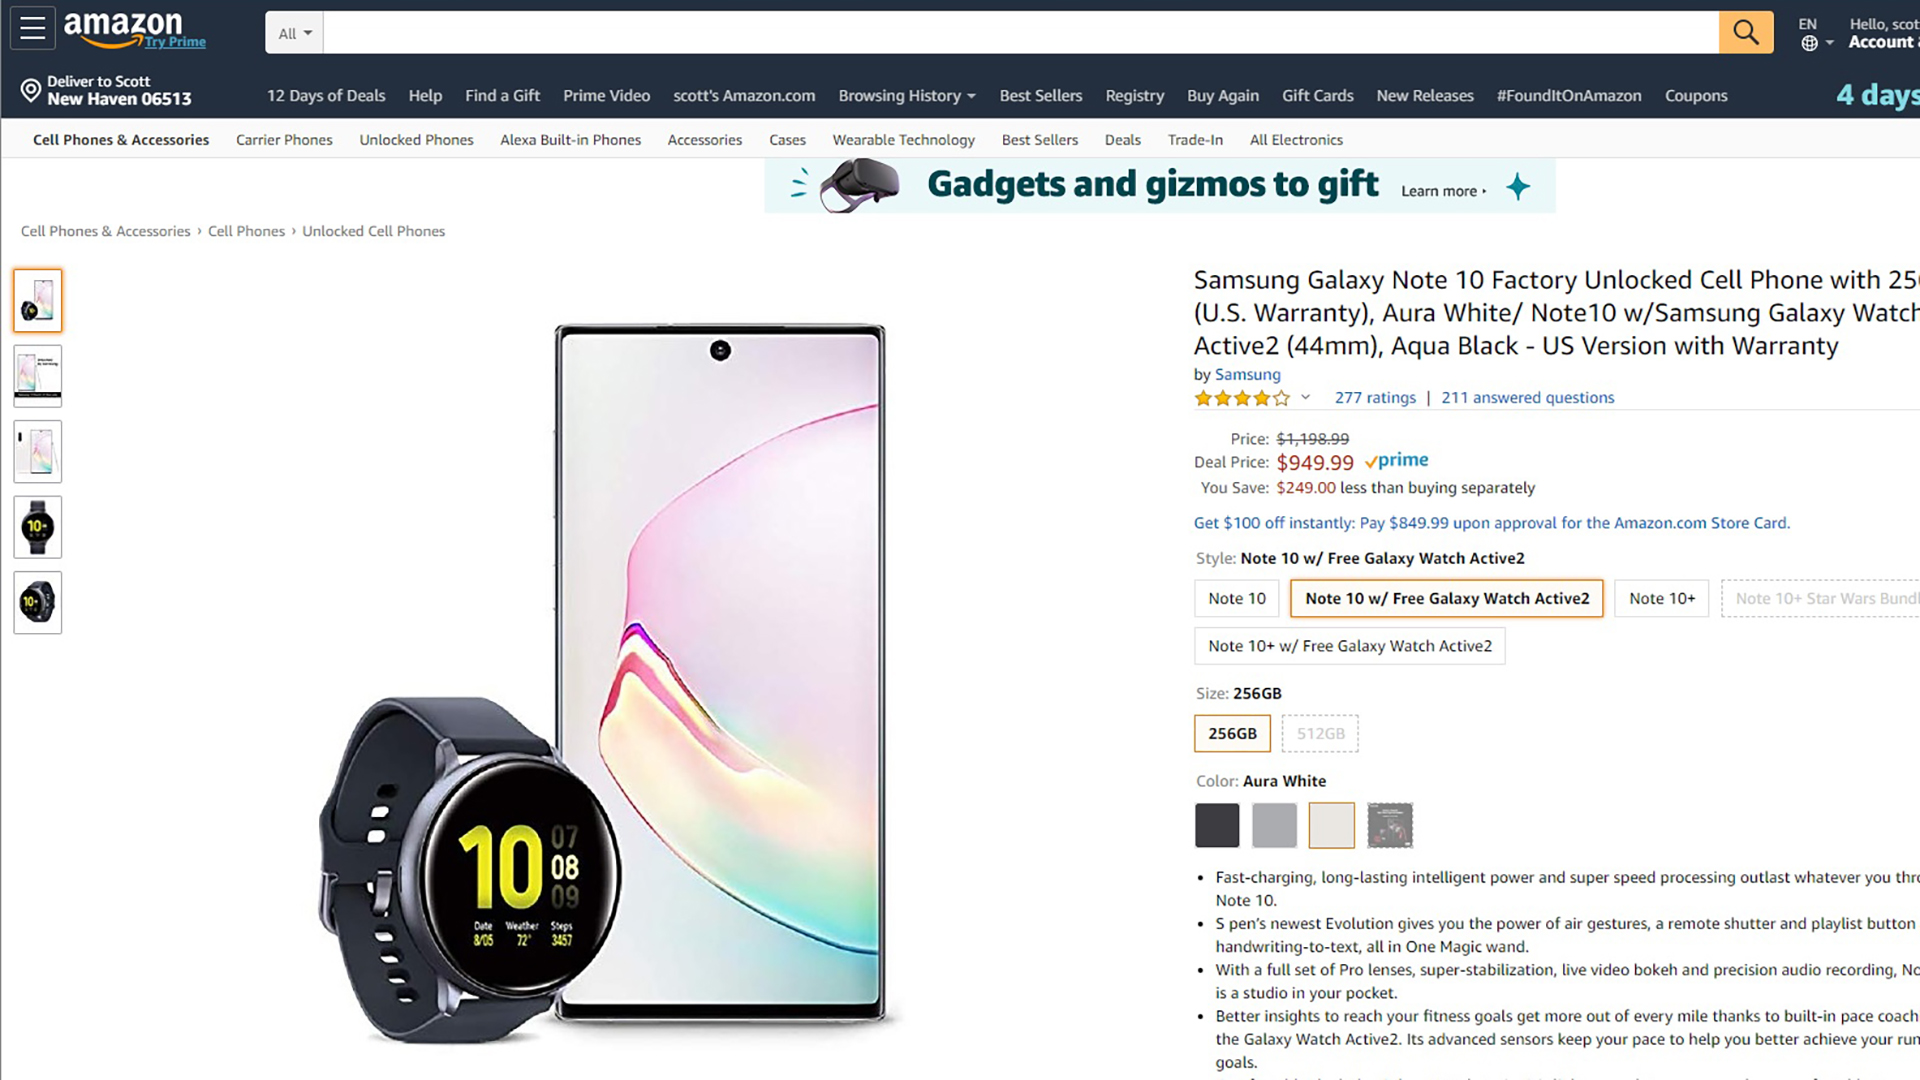 Samsung Galaxy Watch Active 2 Deal with Galaxy Note 10